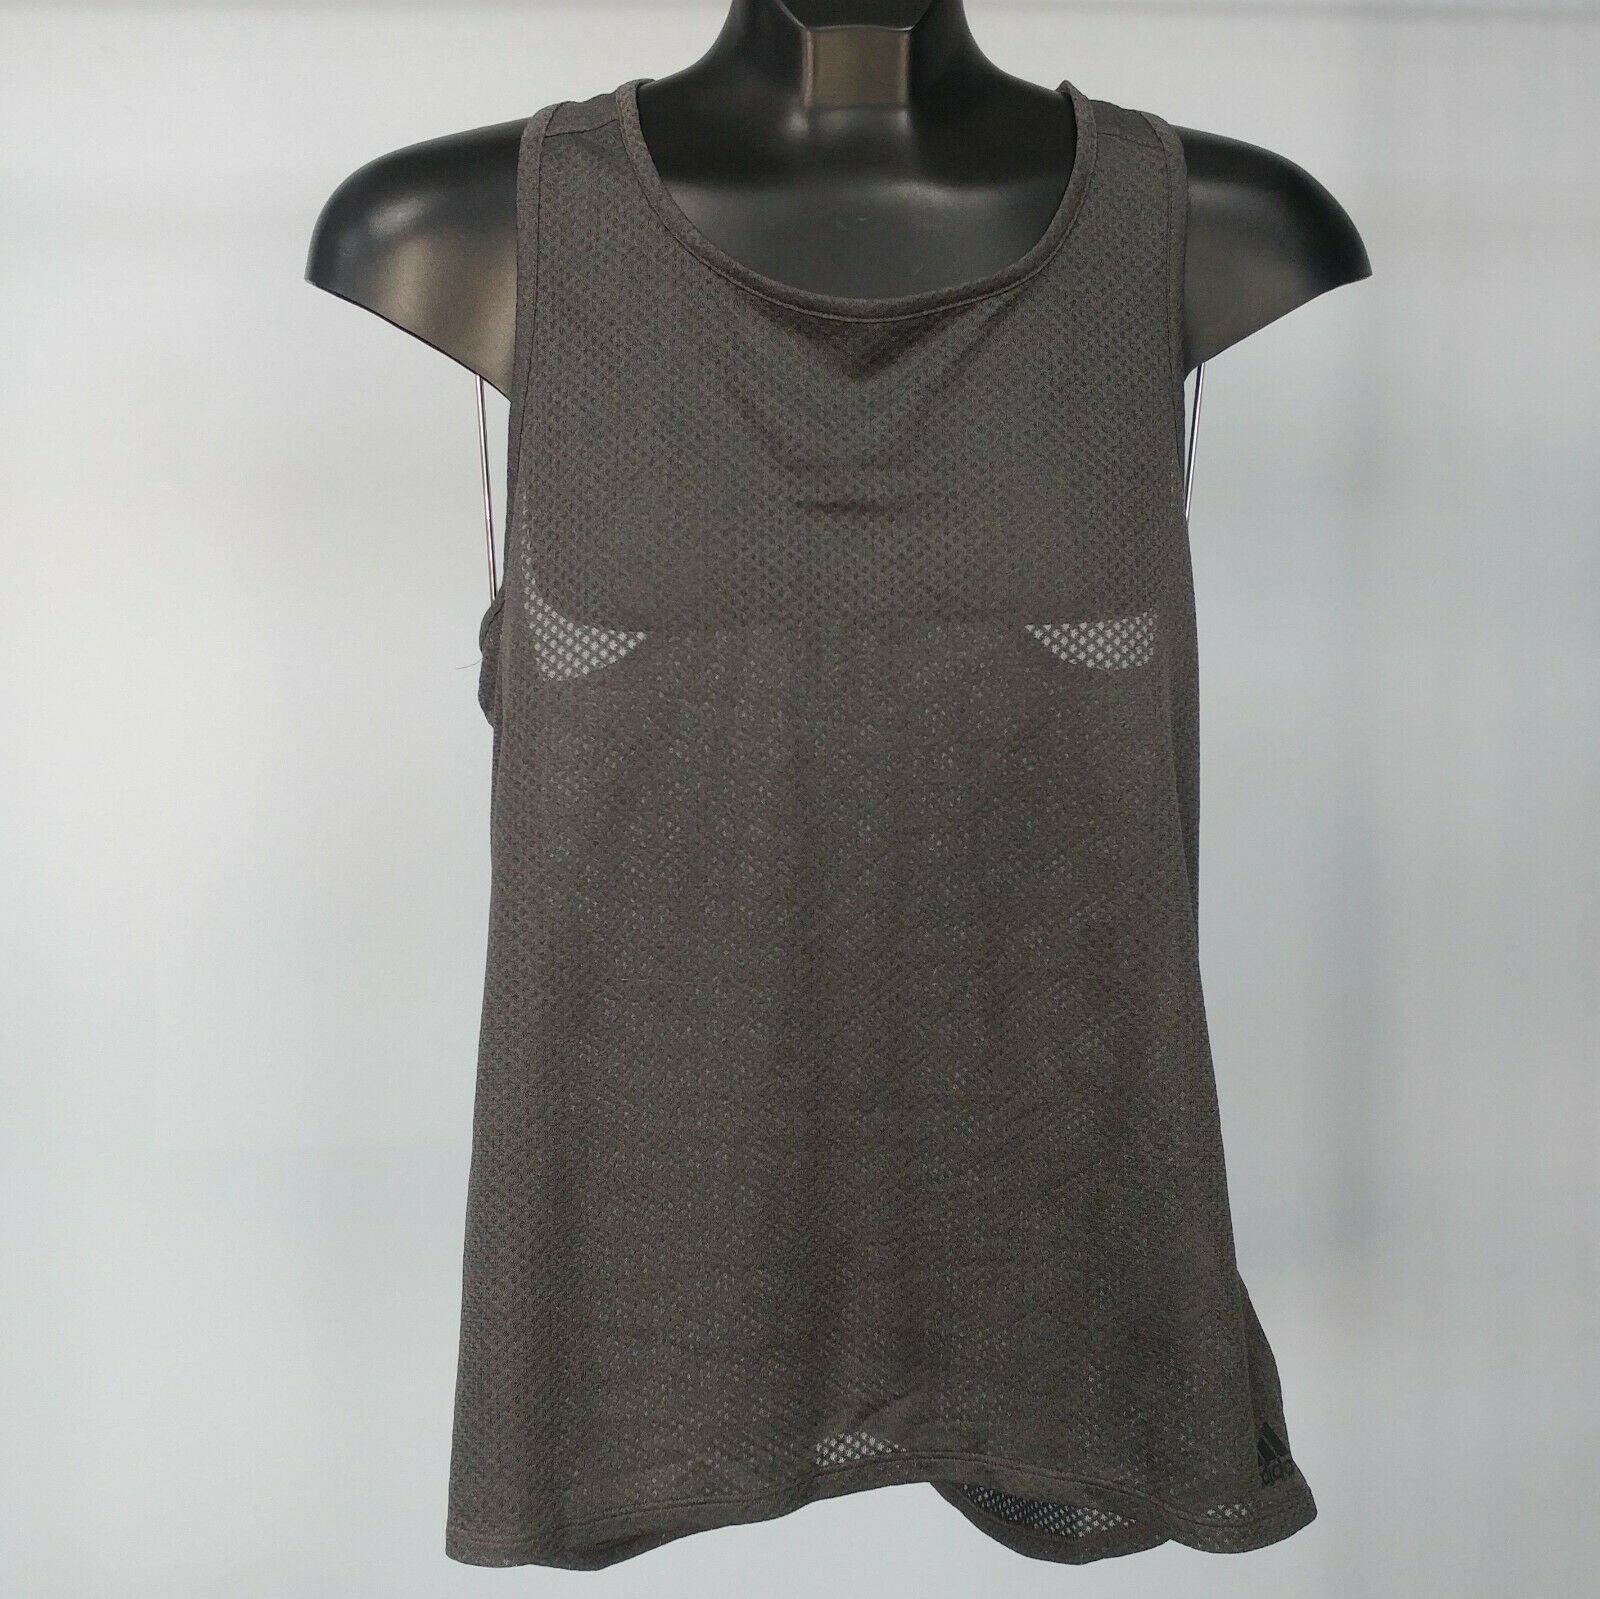 New! Adidas Response Mesh Tank Top - Women's Sizes Xs-xl, All Colors (msrp $30)